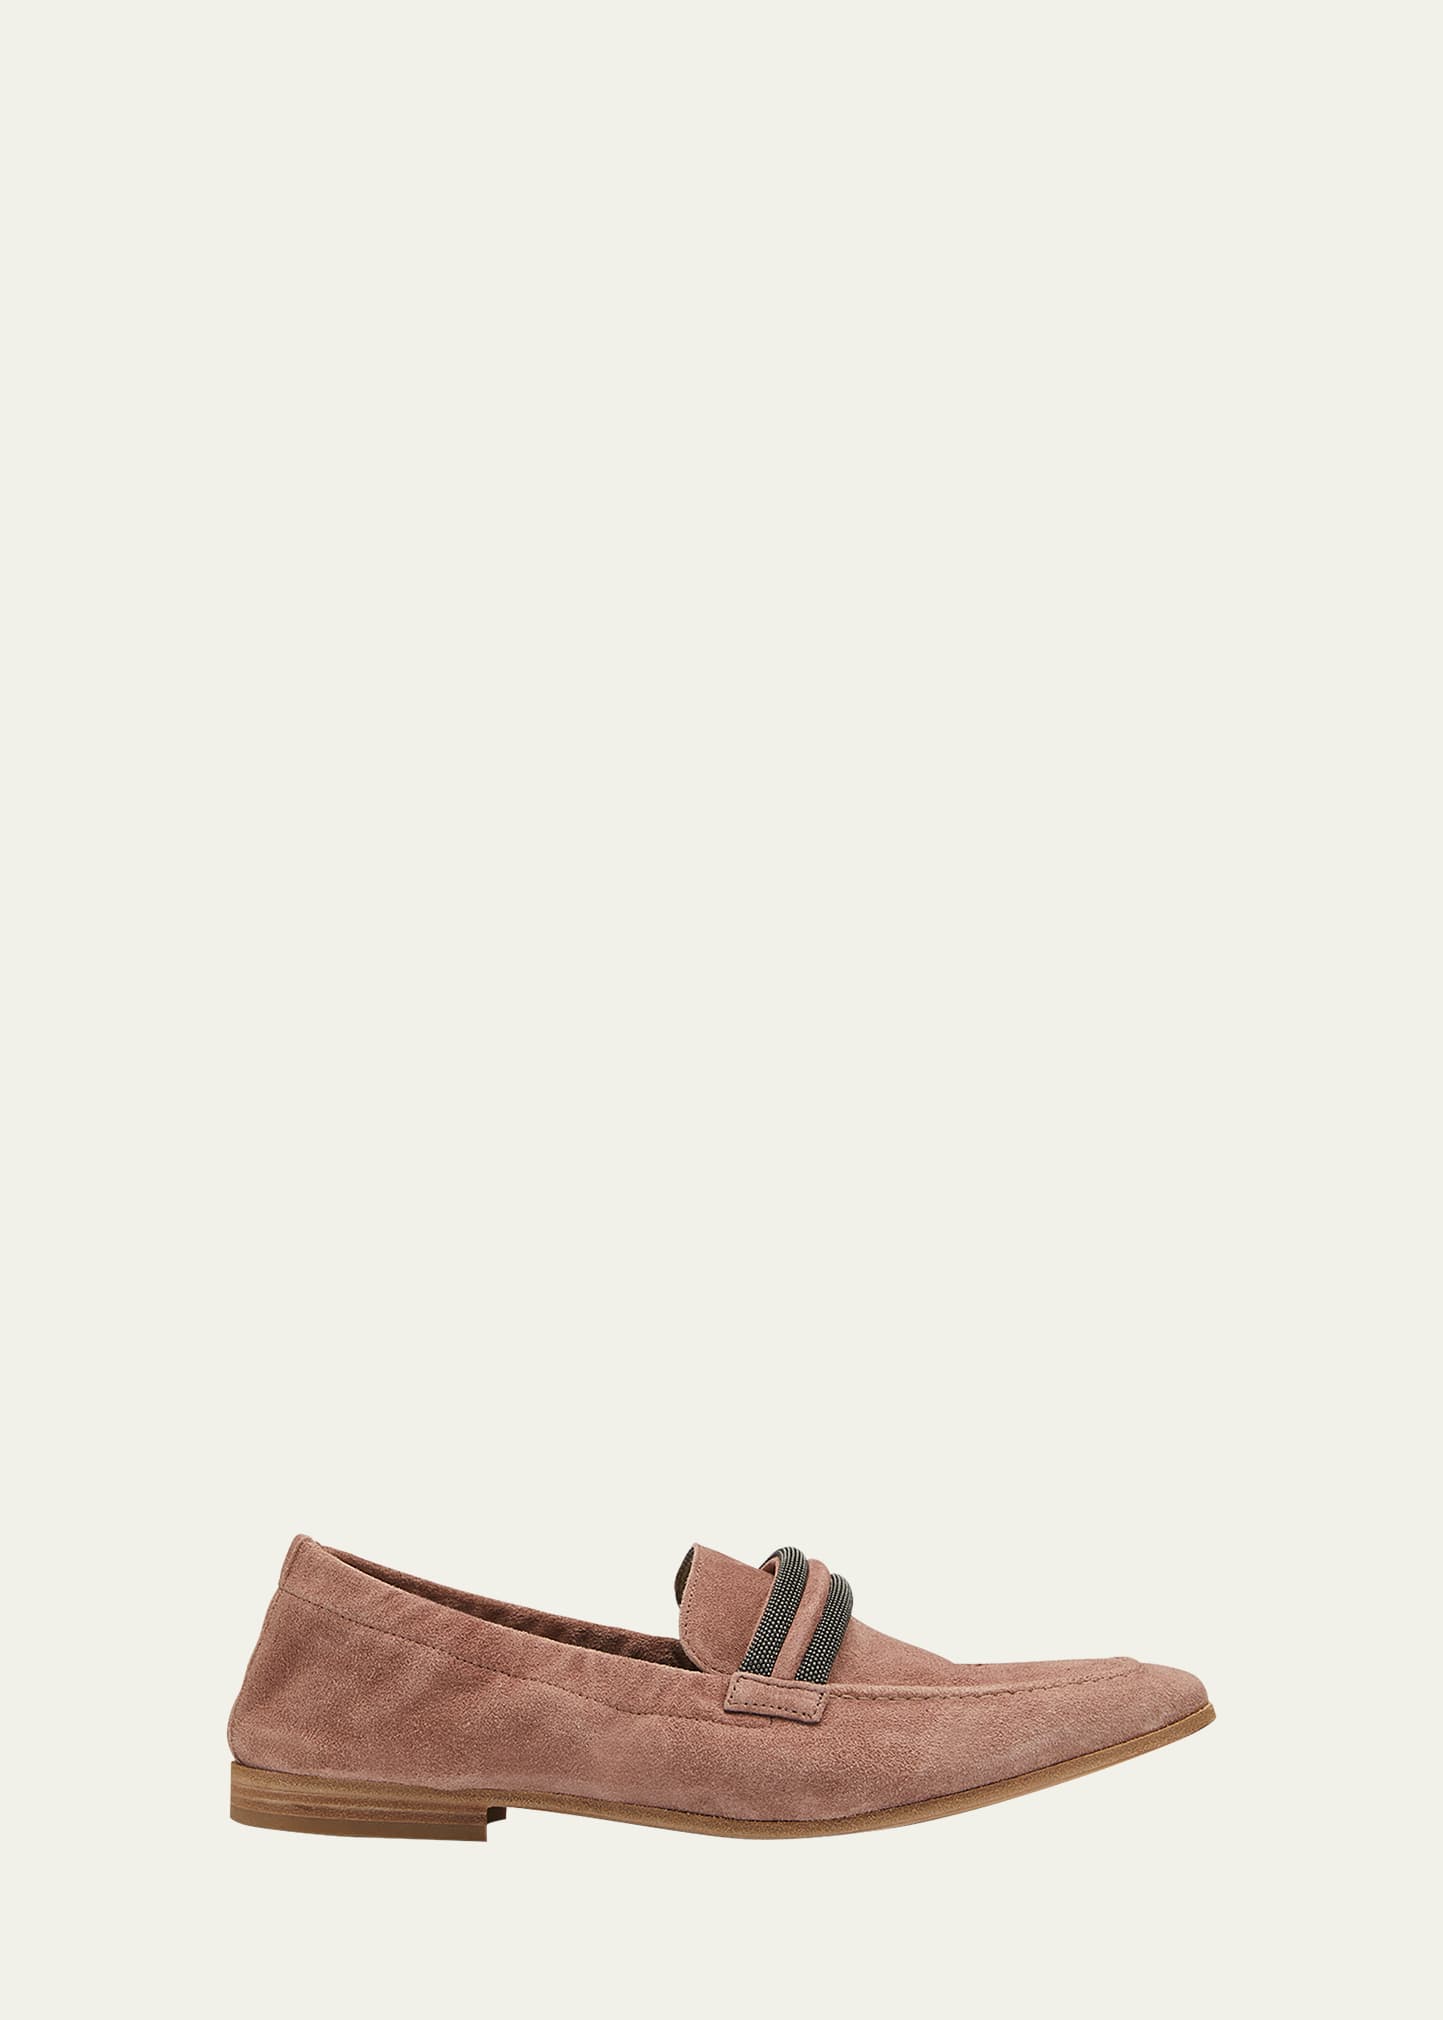 Suede Monili-Strap Flat Loafers